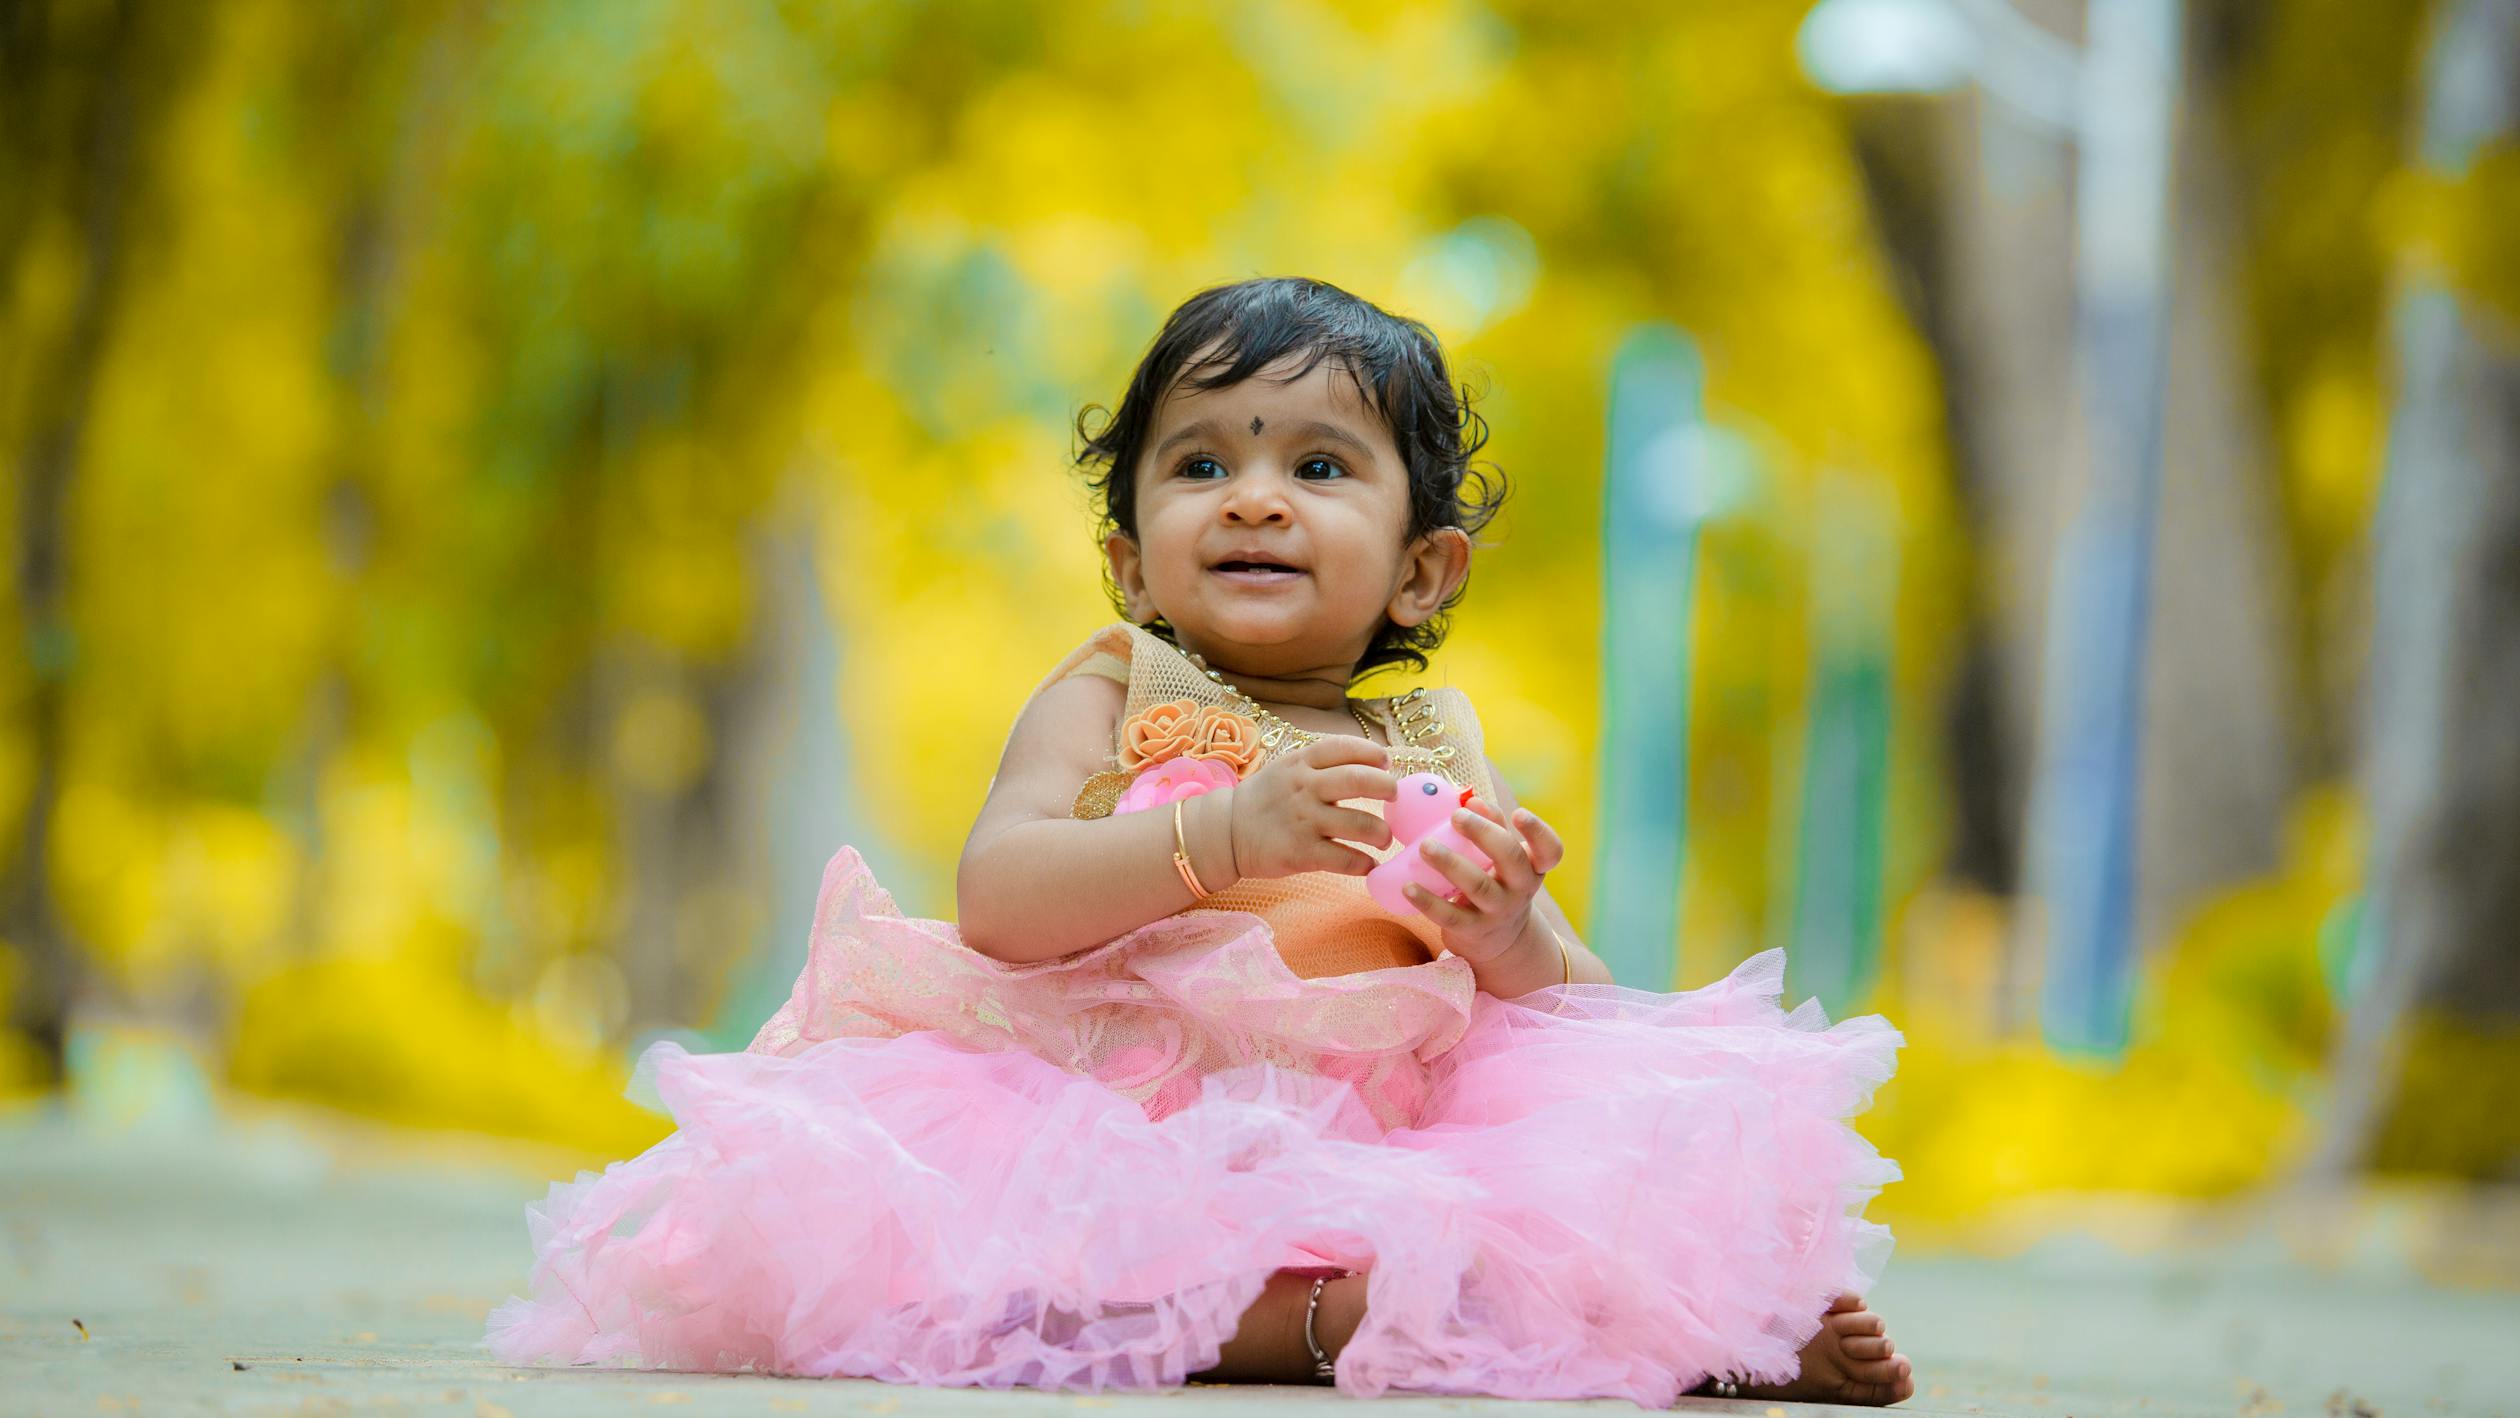 Indian Cute Baby Photo by Nila Racigan from Pexels: https://www.pexels.com/photo/adorable-ethnic-toddler-smiling-in-forest-4593615/